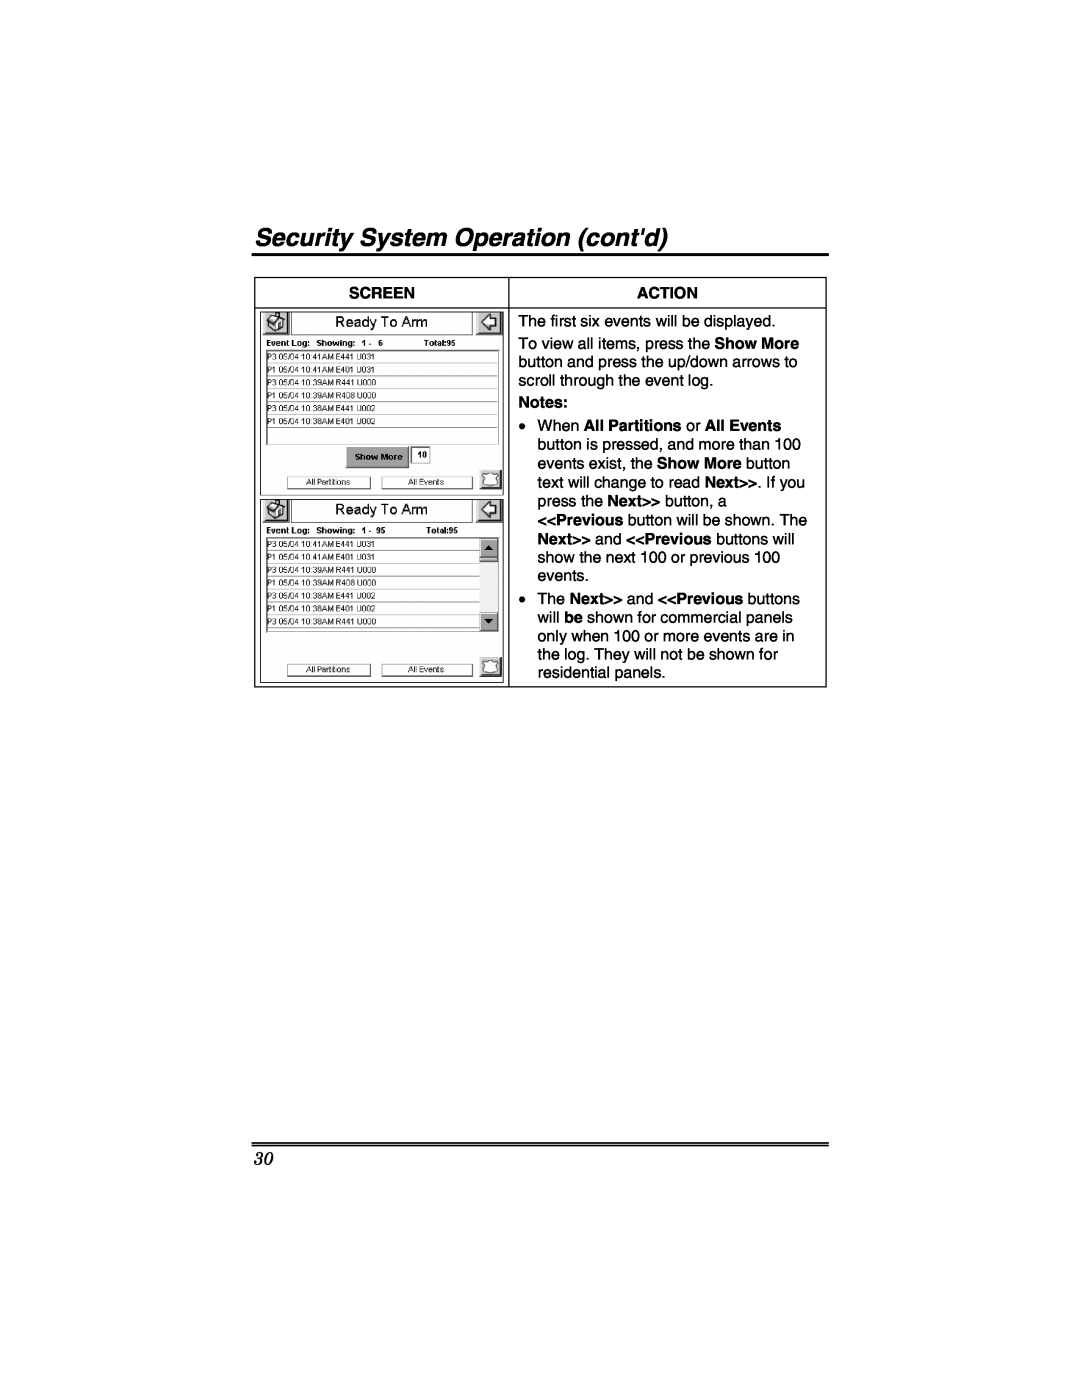 Honeywell 6271V manual Security System Operation contd, Screen, Action, When All Partitions or All Events 